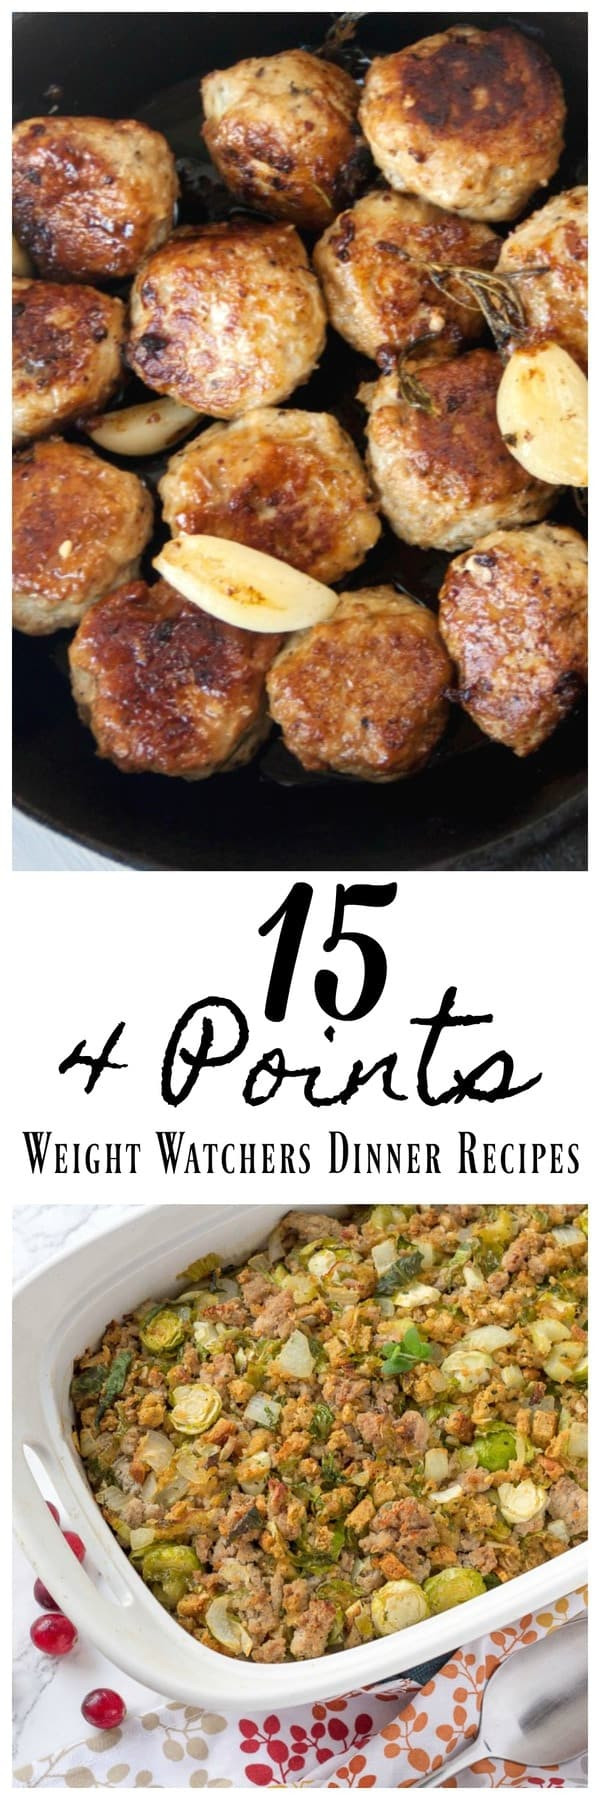 Weight Watchers Dinner Recipes
 15 4 Point Weight Watchers Dinner Recipes • Mid Momma